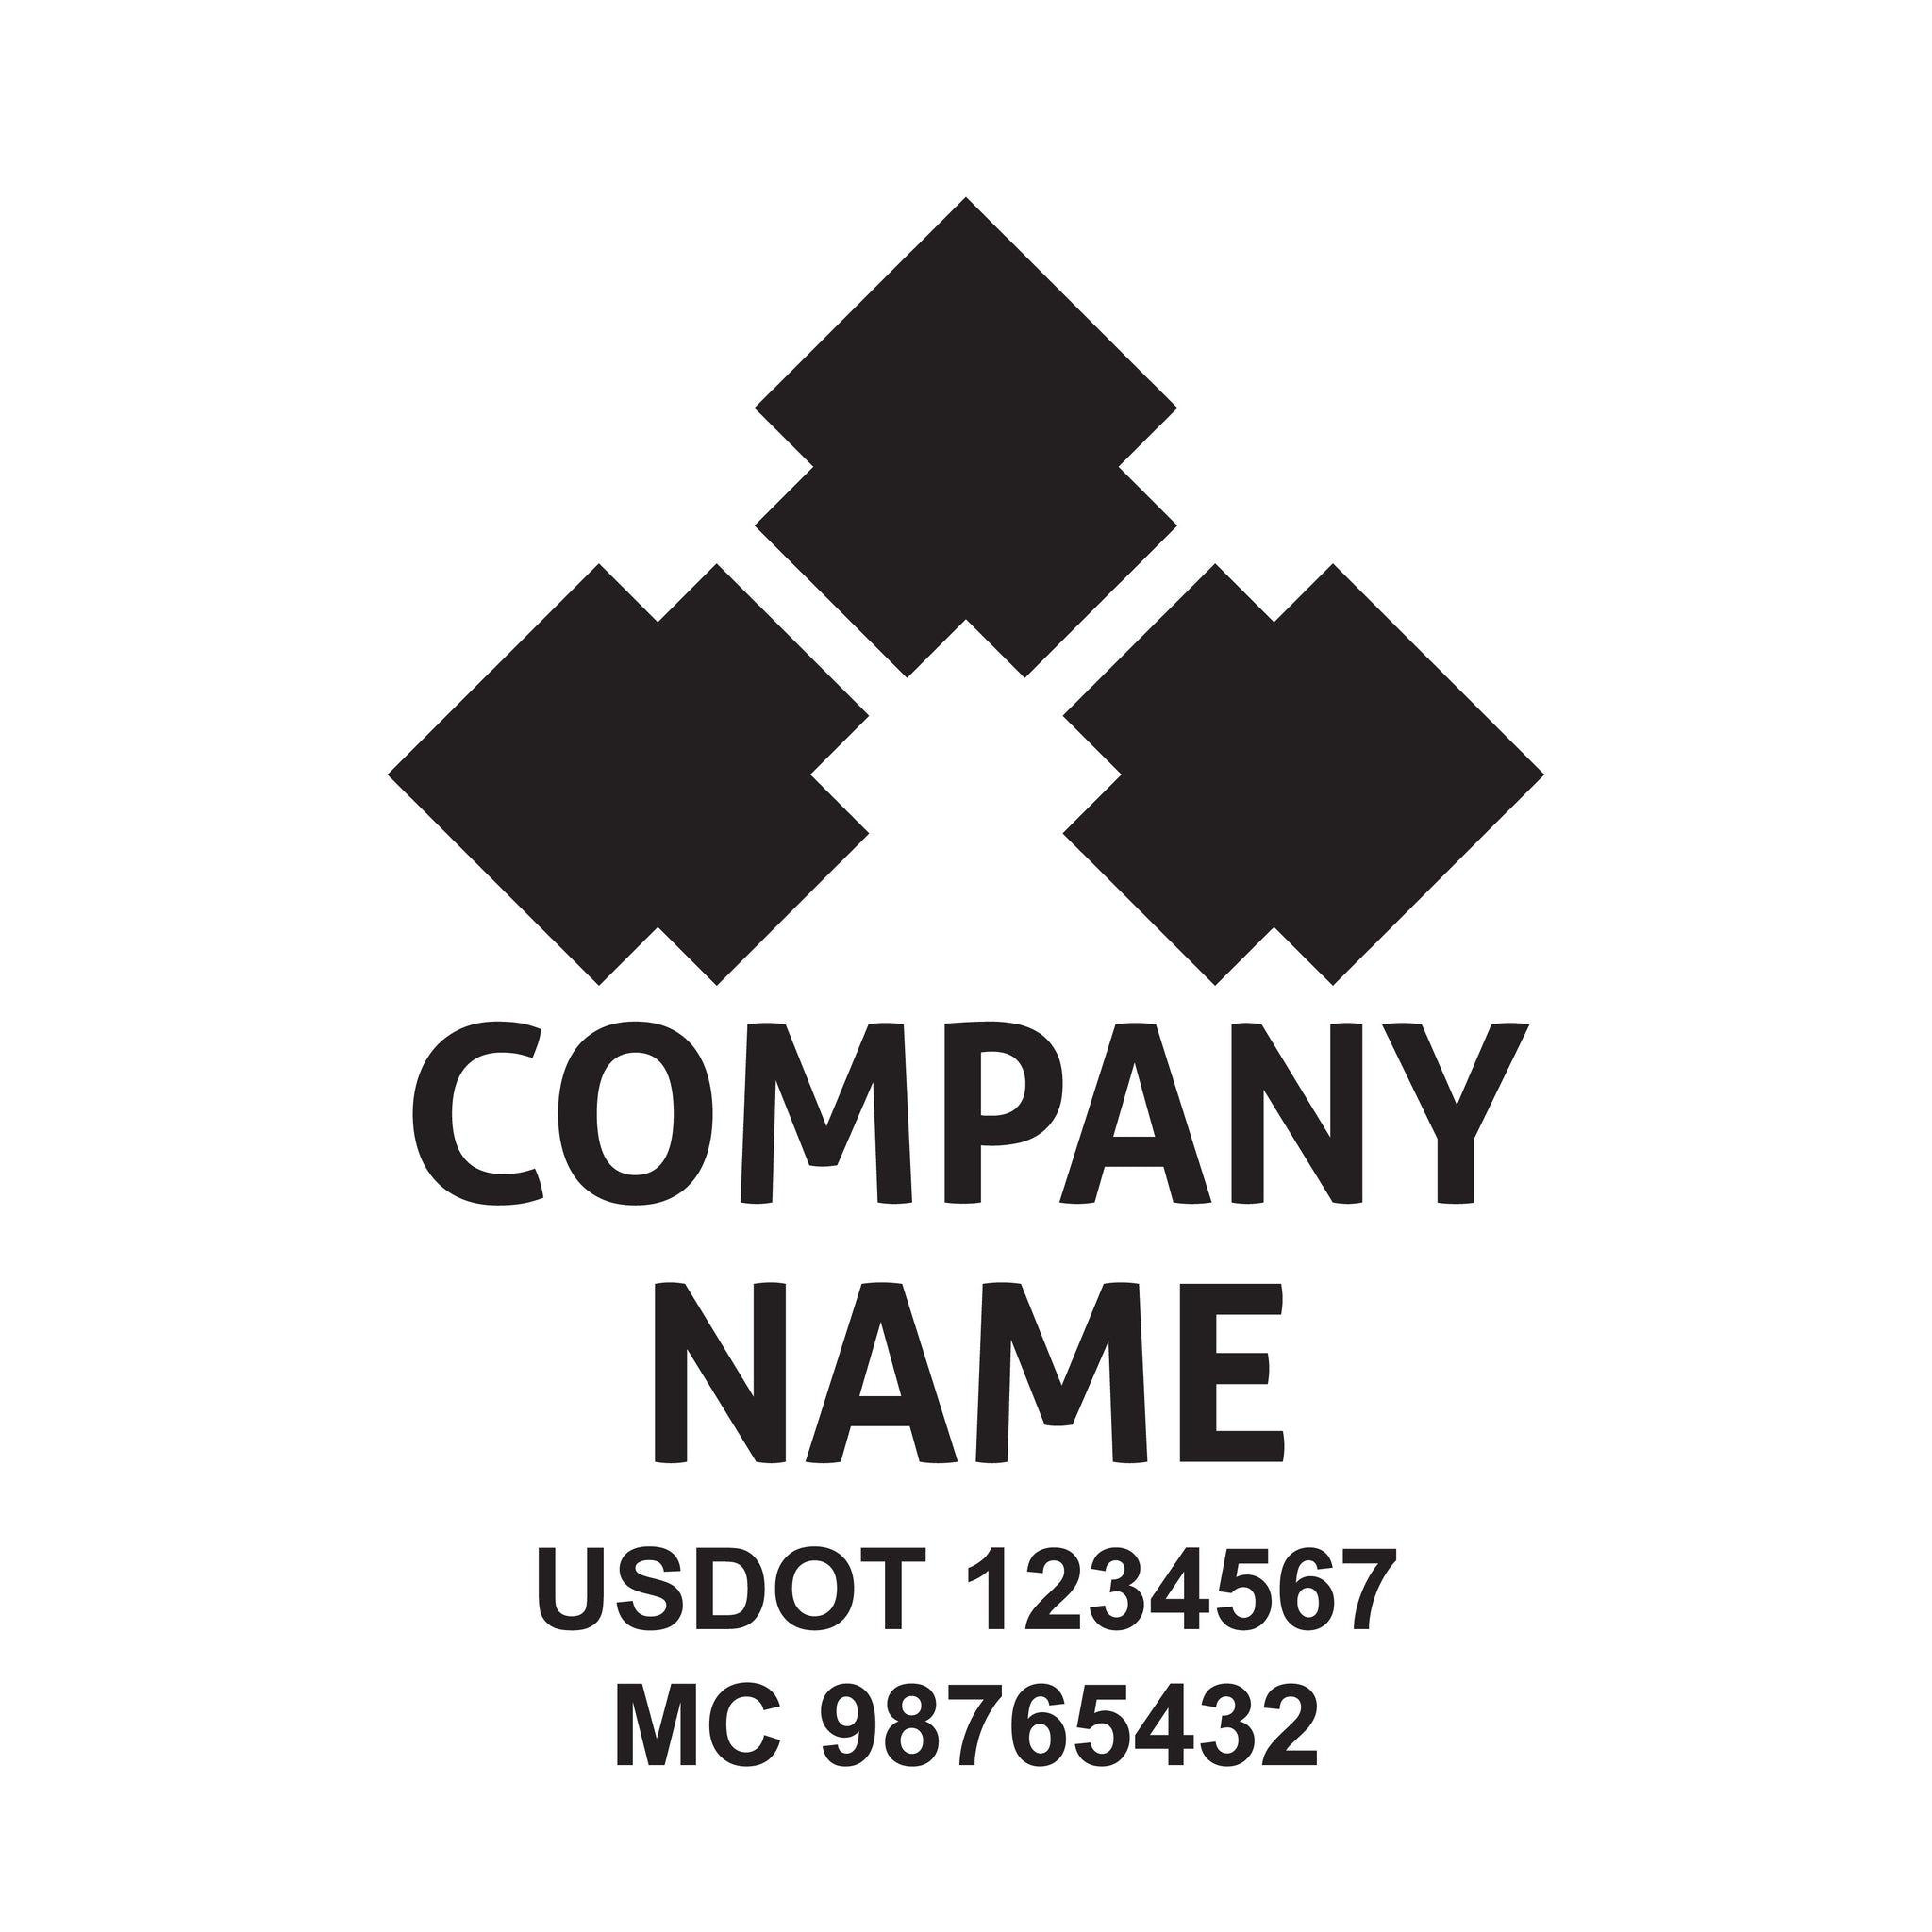 Company name logistic decal